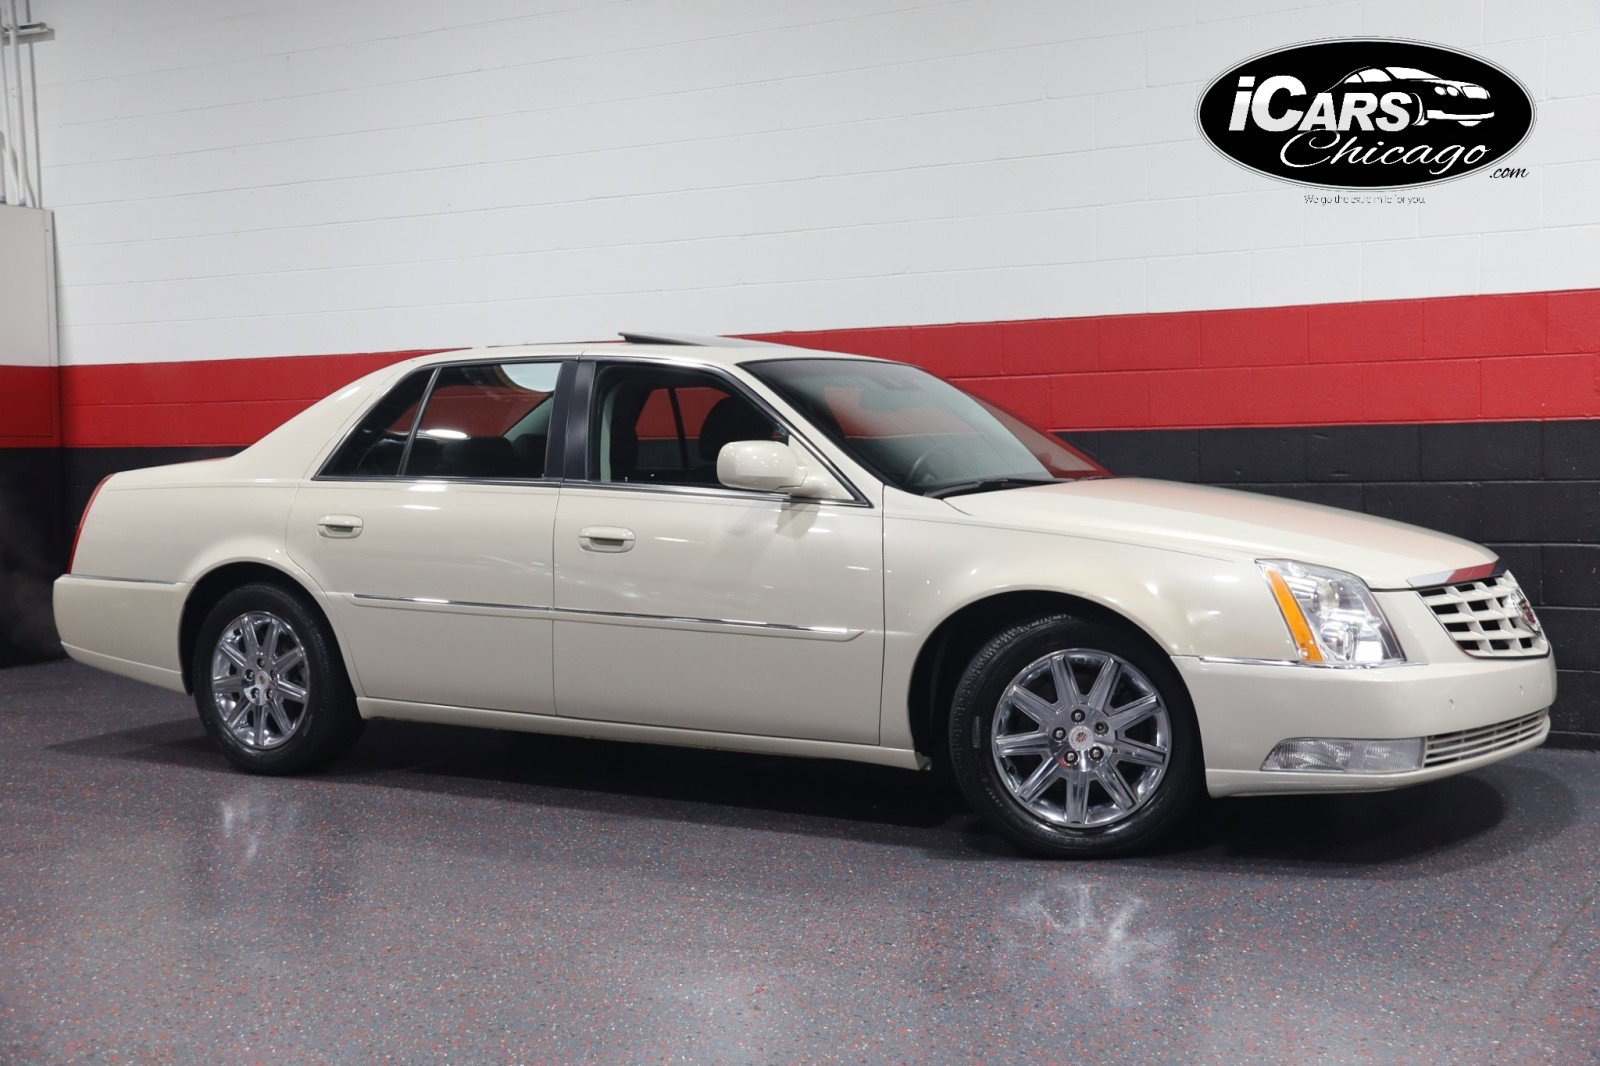 Used Cadillac DTS for Sale Near Me in Chicago, IL - Autotrader